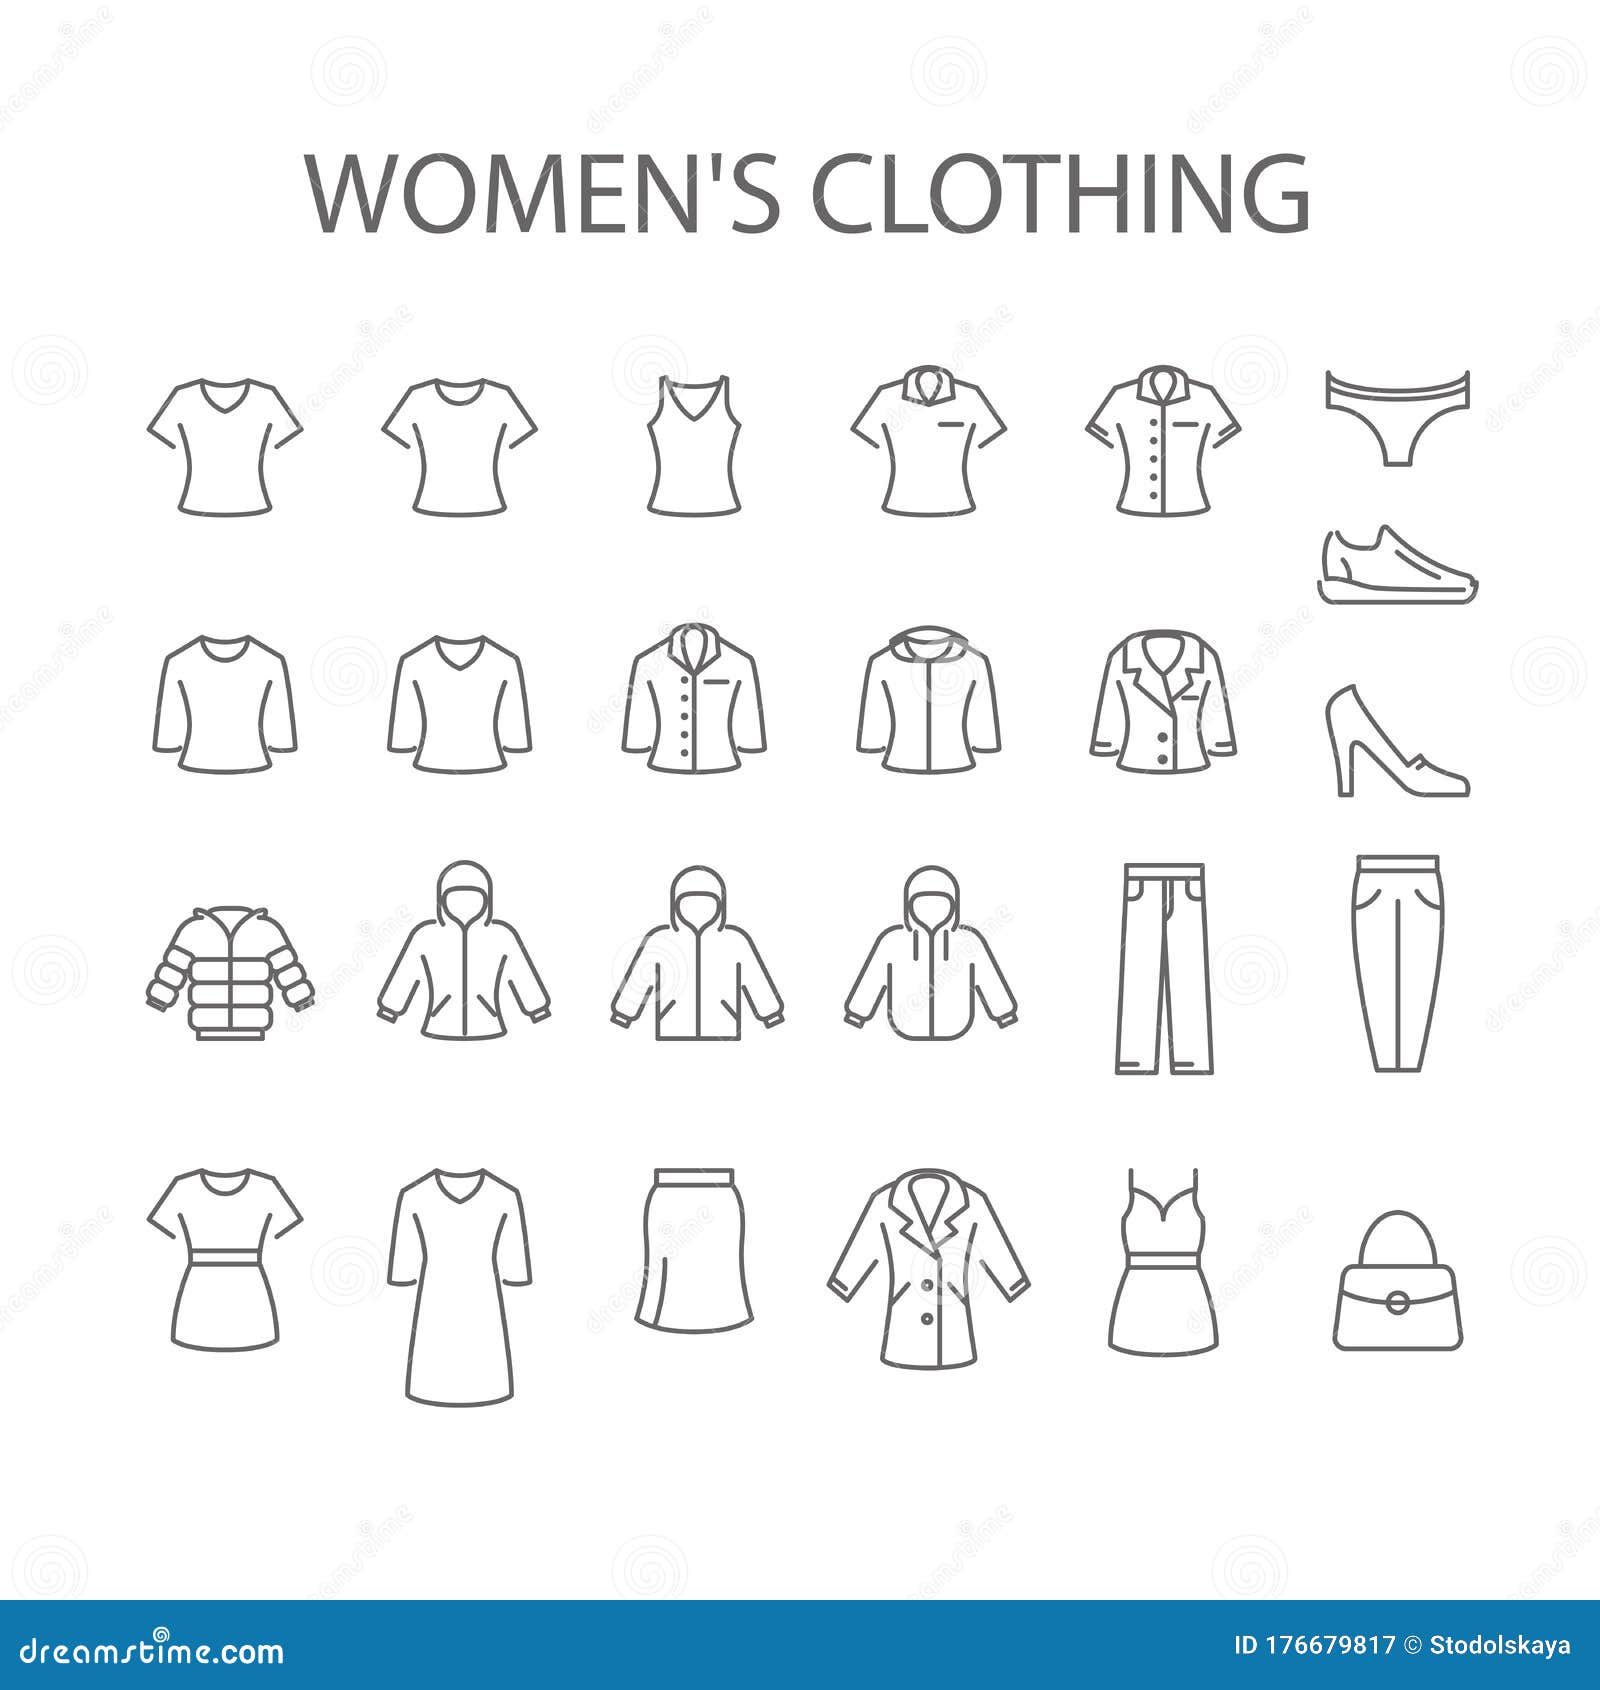 women`s clothing icons - set of woman garments type signs, outerwear collection